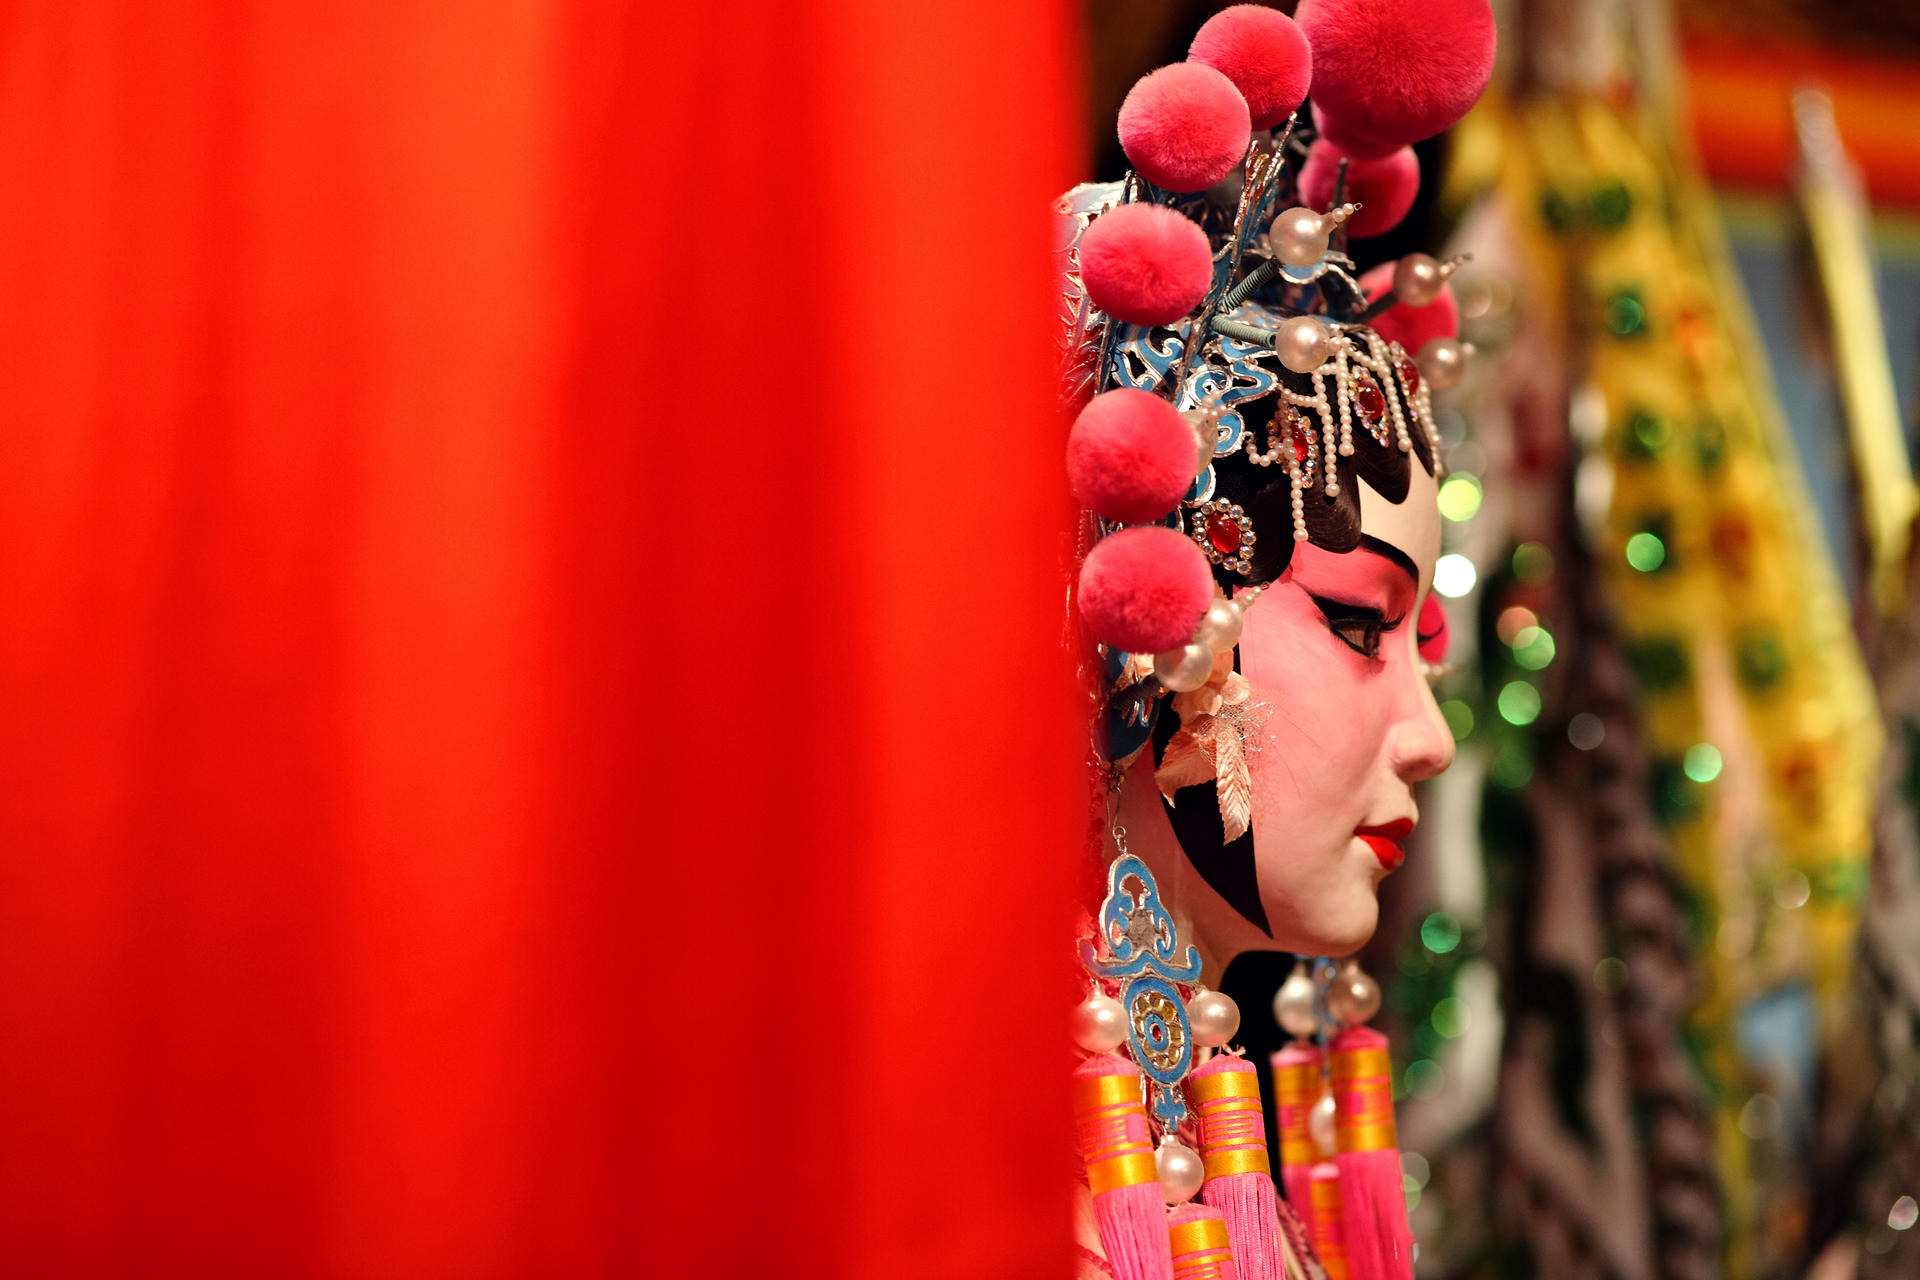 Cantonese opera faces great challenges despite its 1,000 years of history.